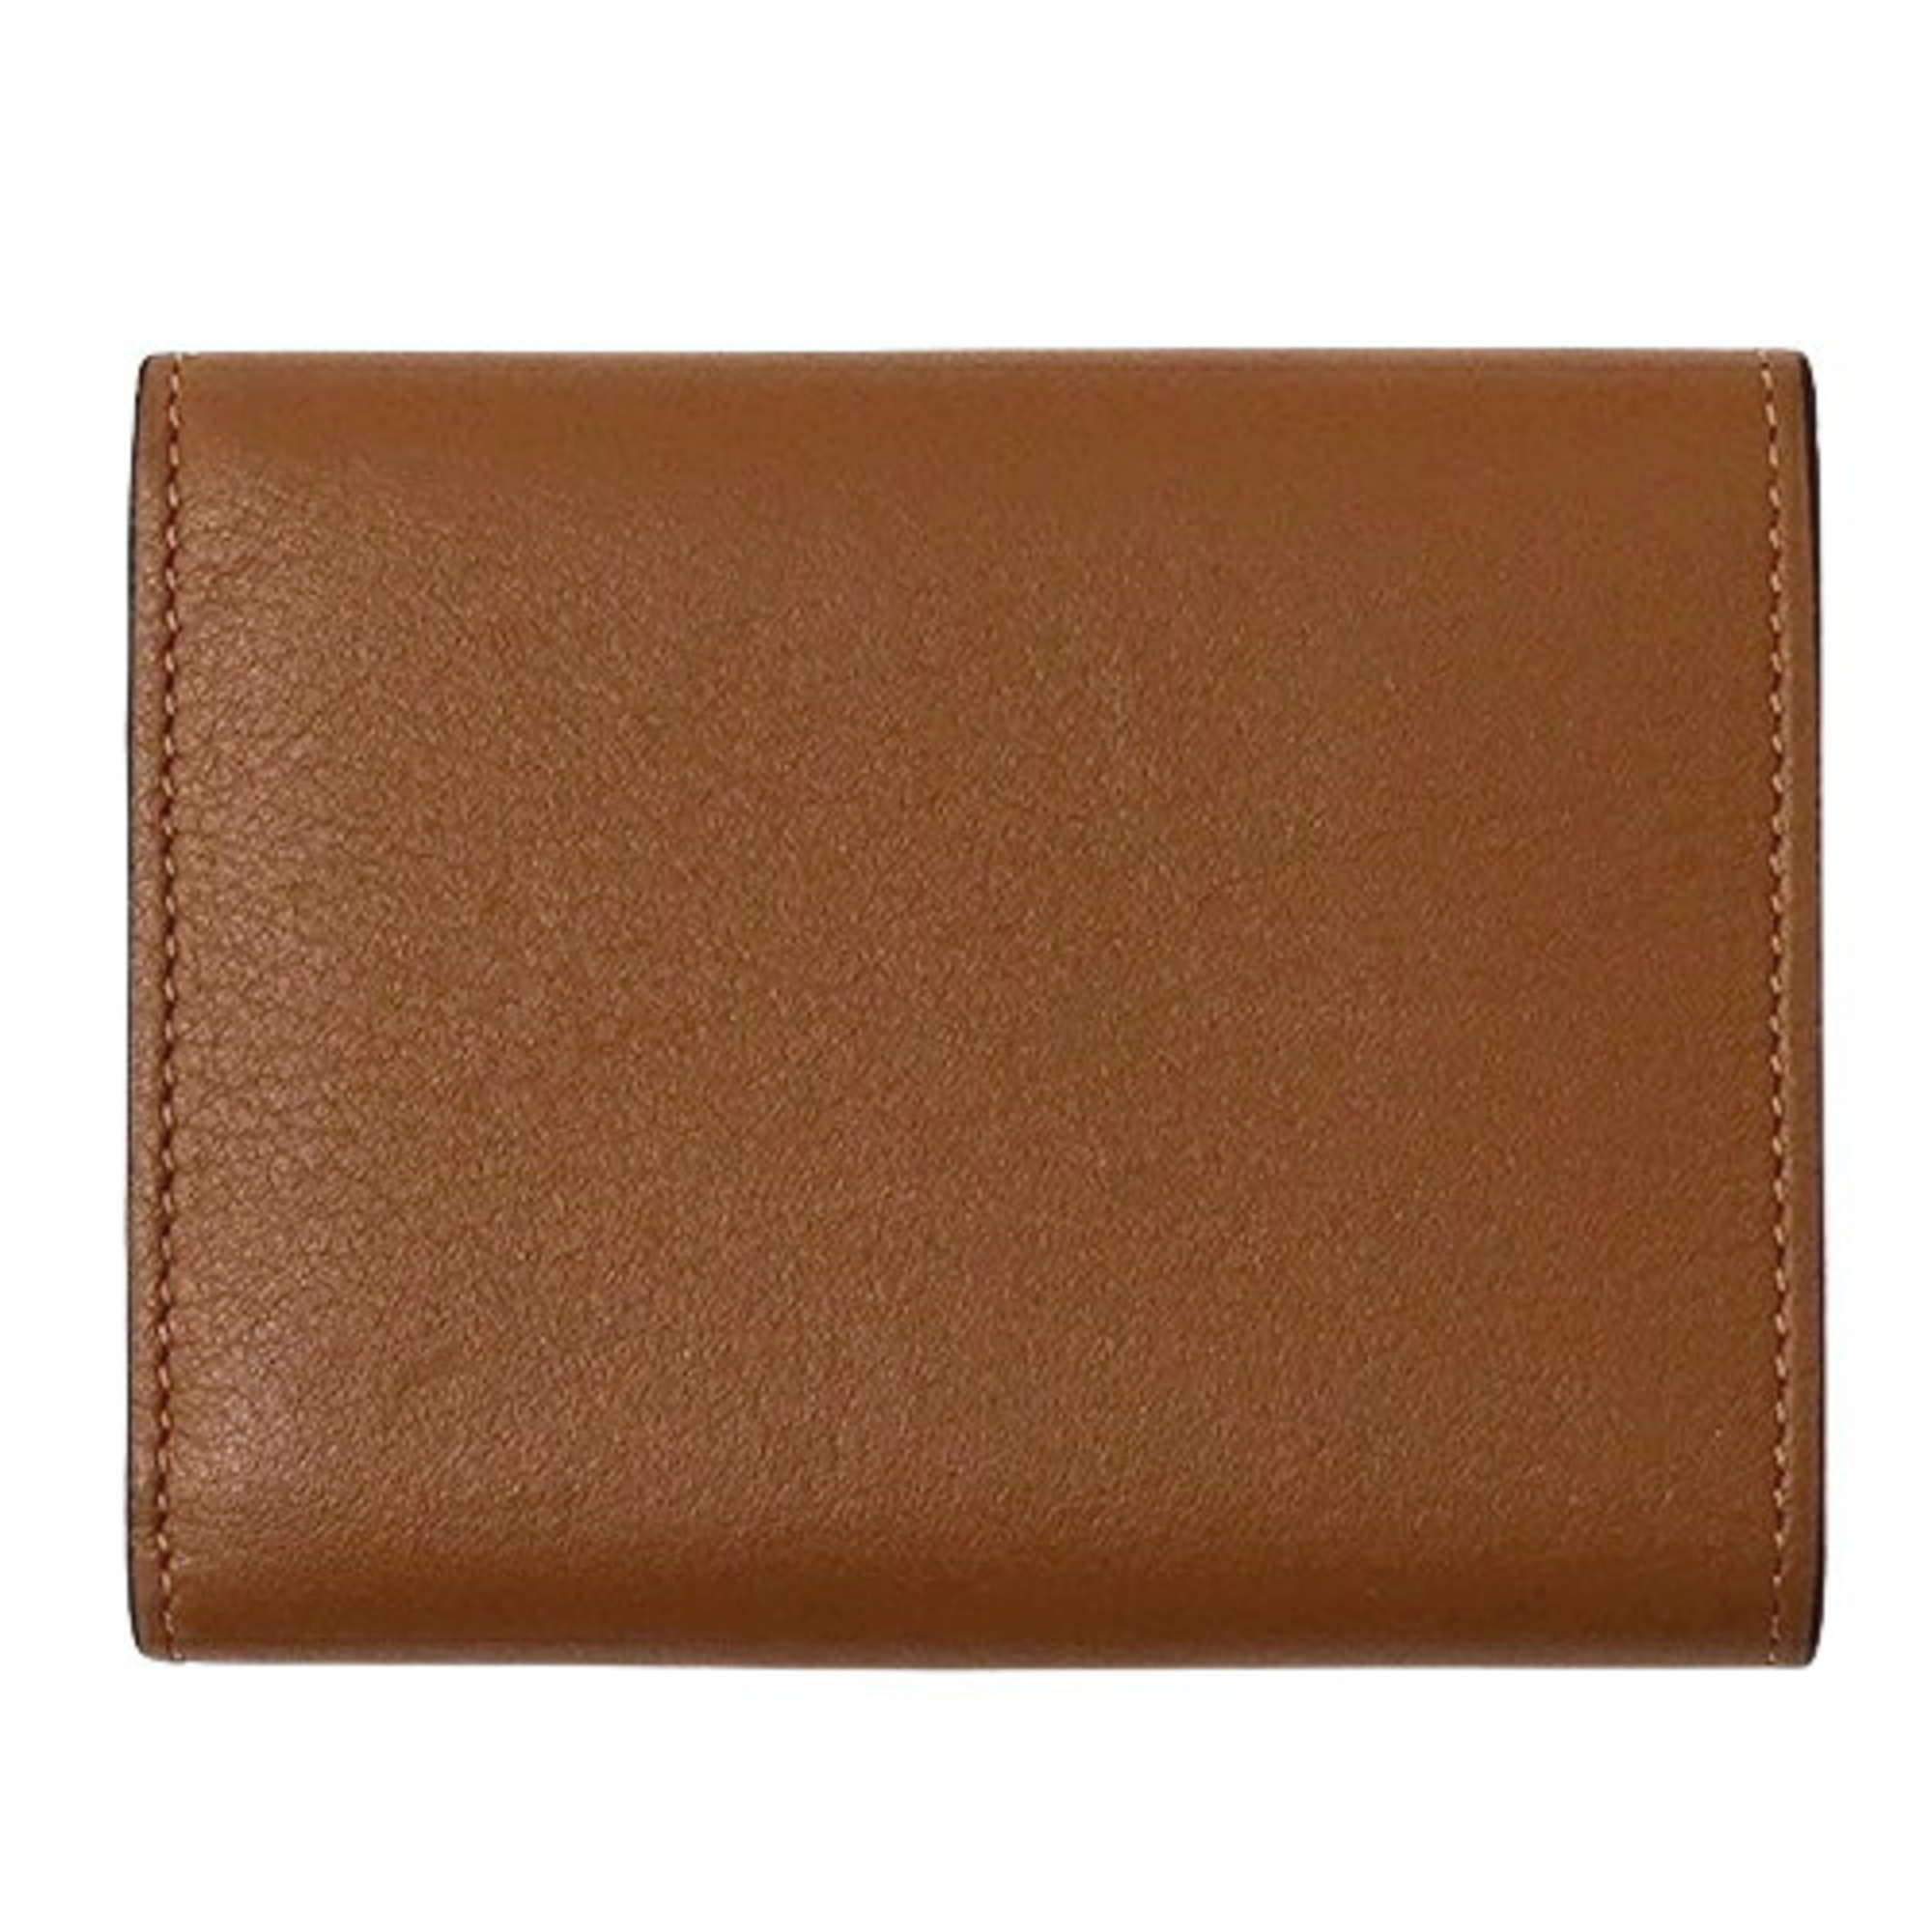 LOEWE Women's Wallet Tri-fold Anagram Leather Brown Compact